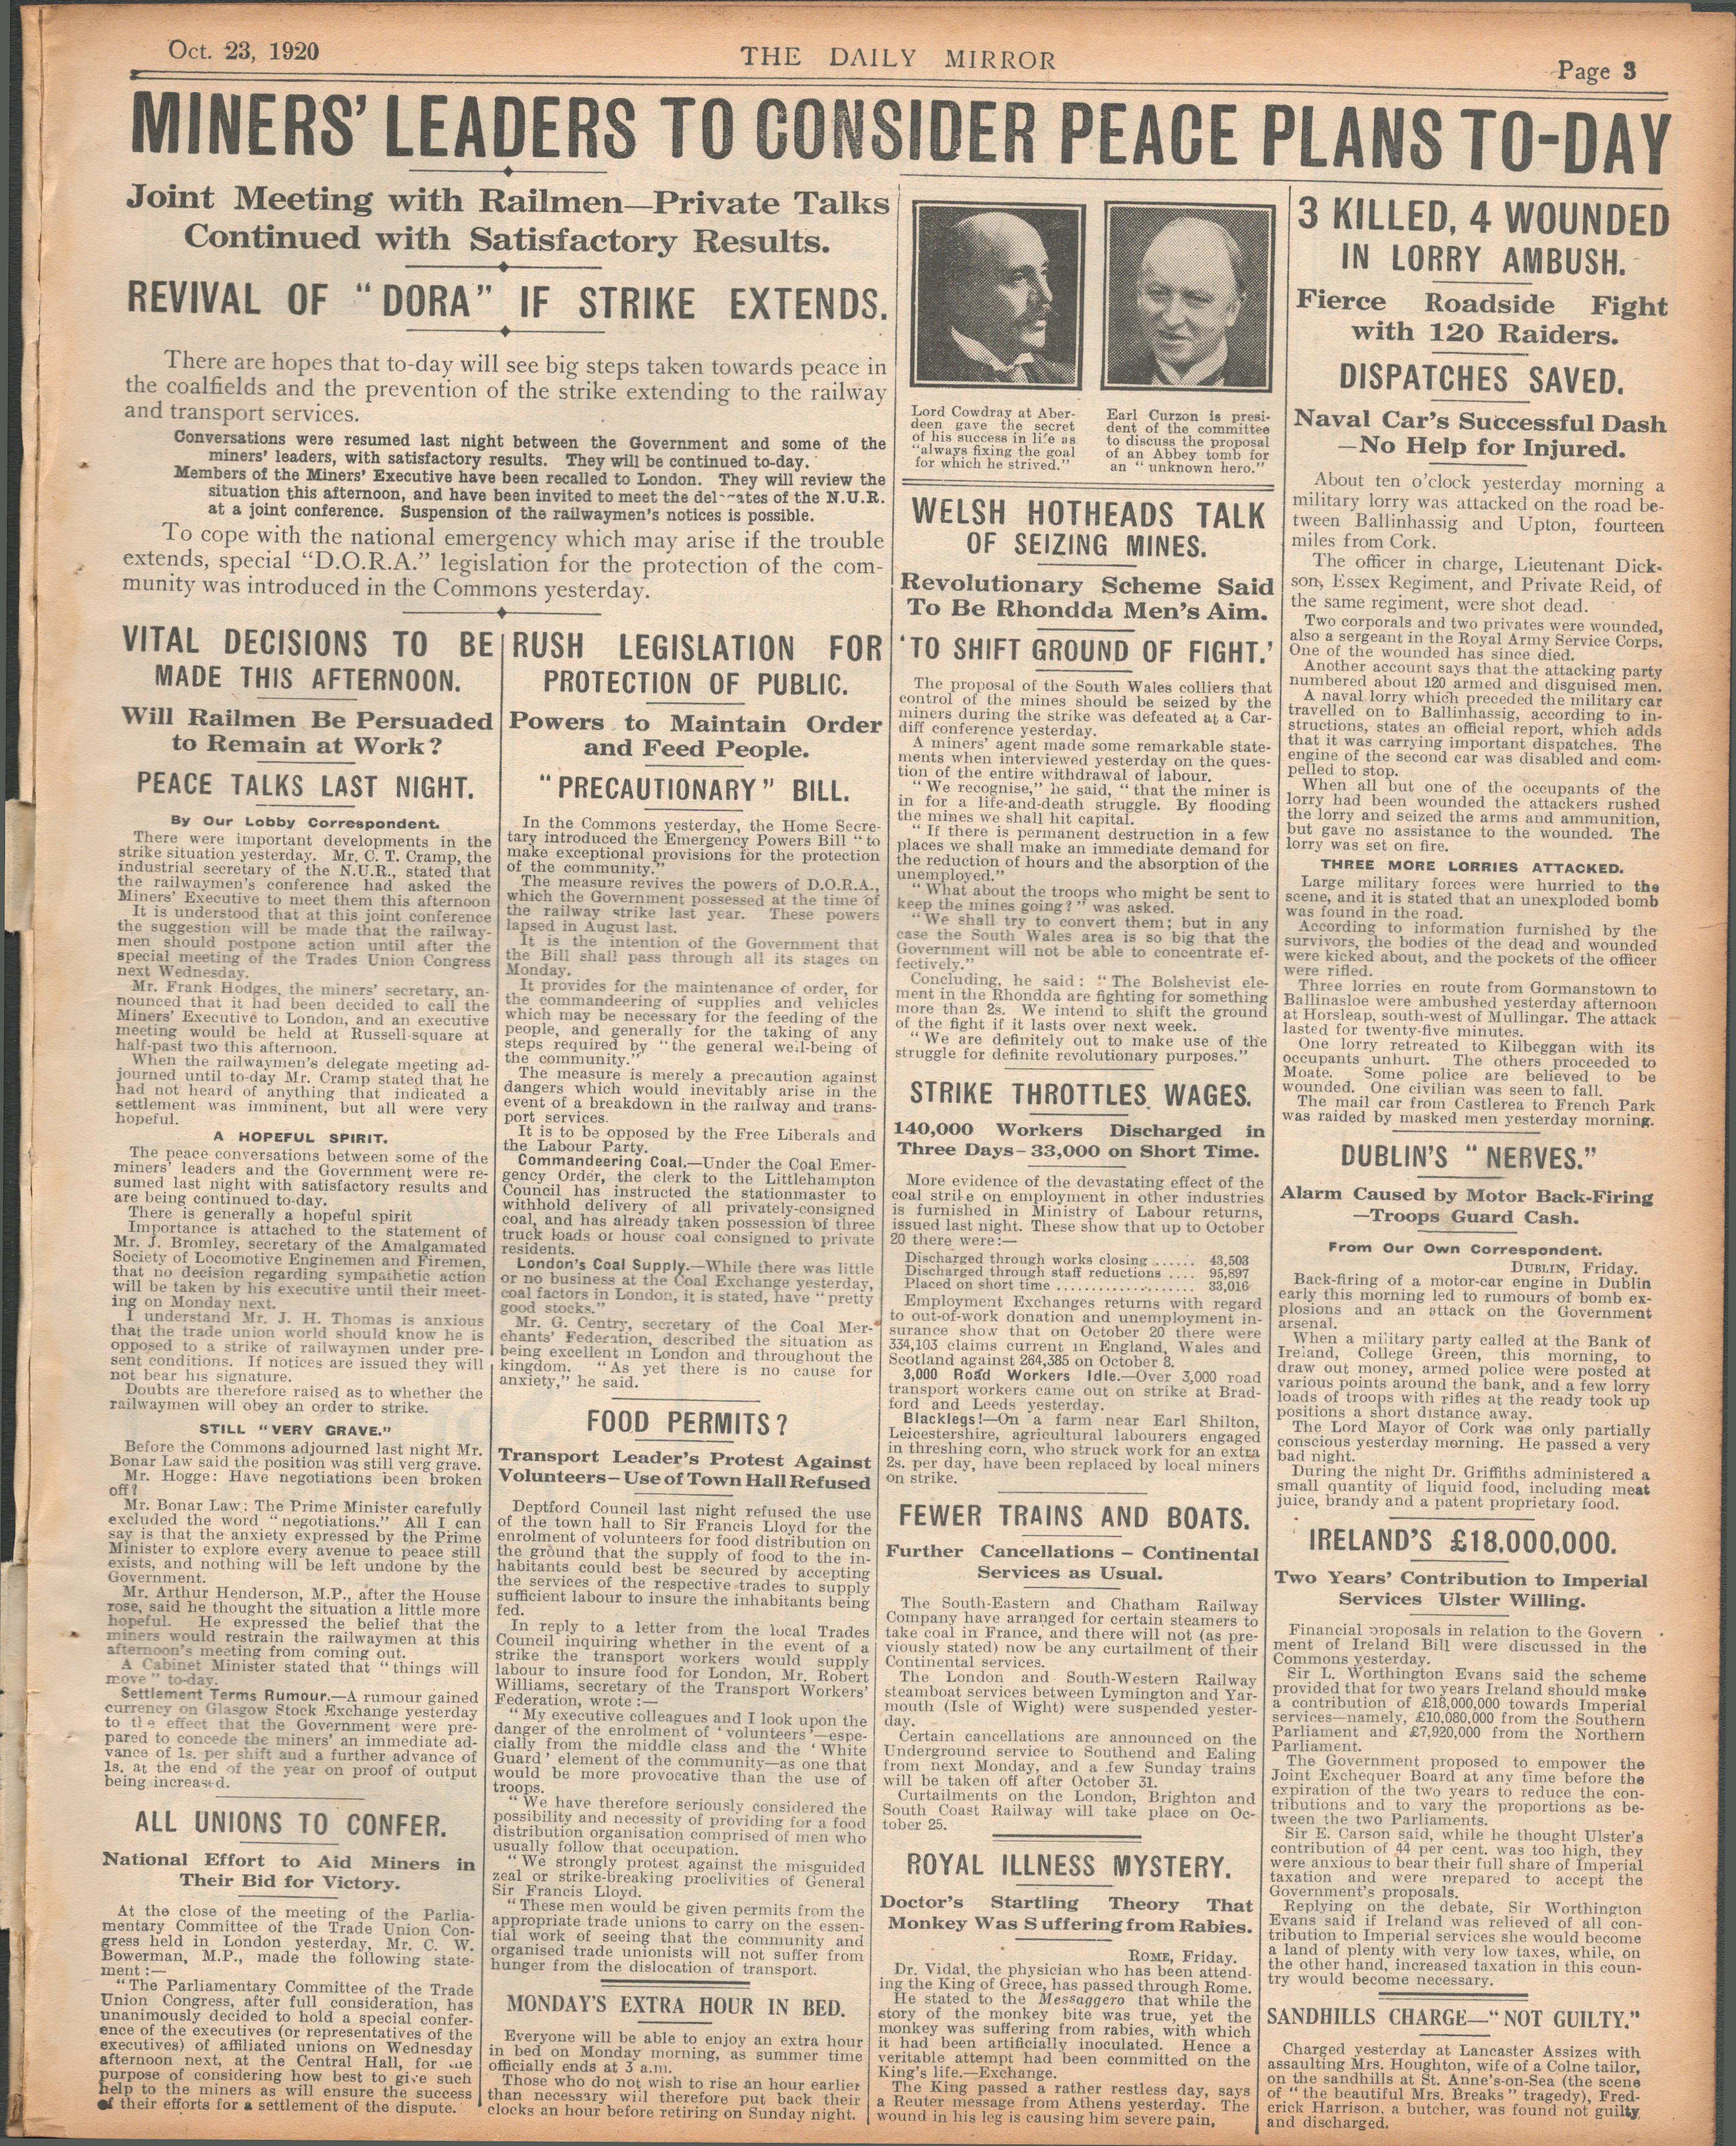 Set Of 3 Original Newspapers Each With The Irish War Of Independence News Reports (3) - Image 2 of 3